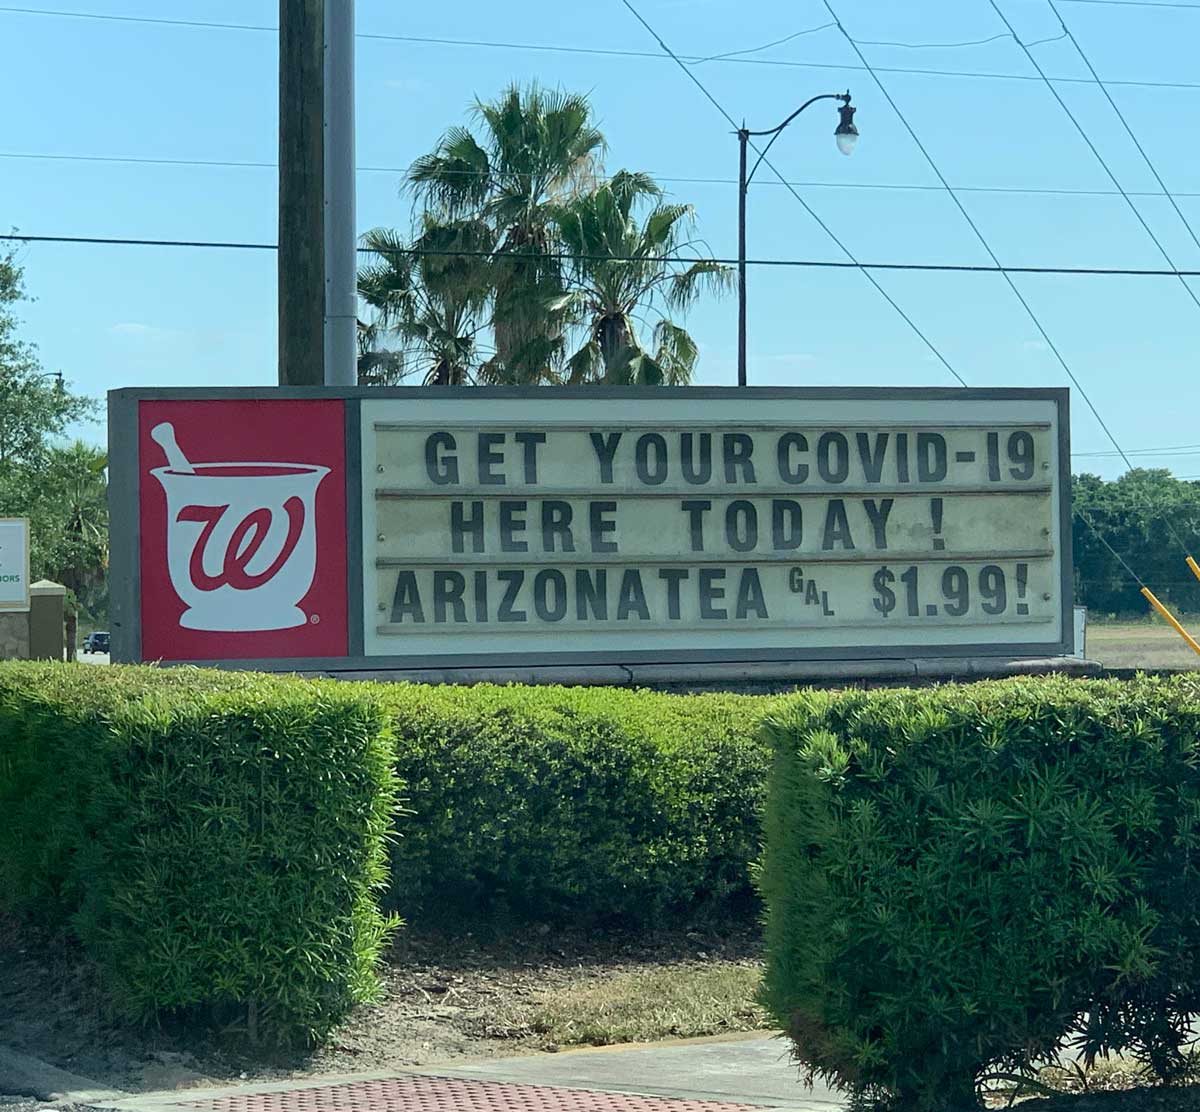 Seen at my local Walgreens in Florida